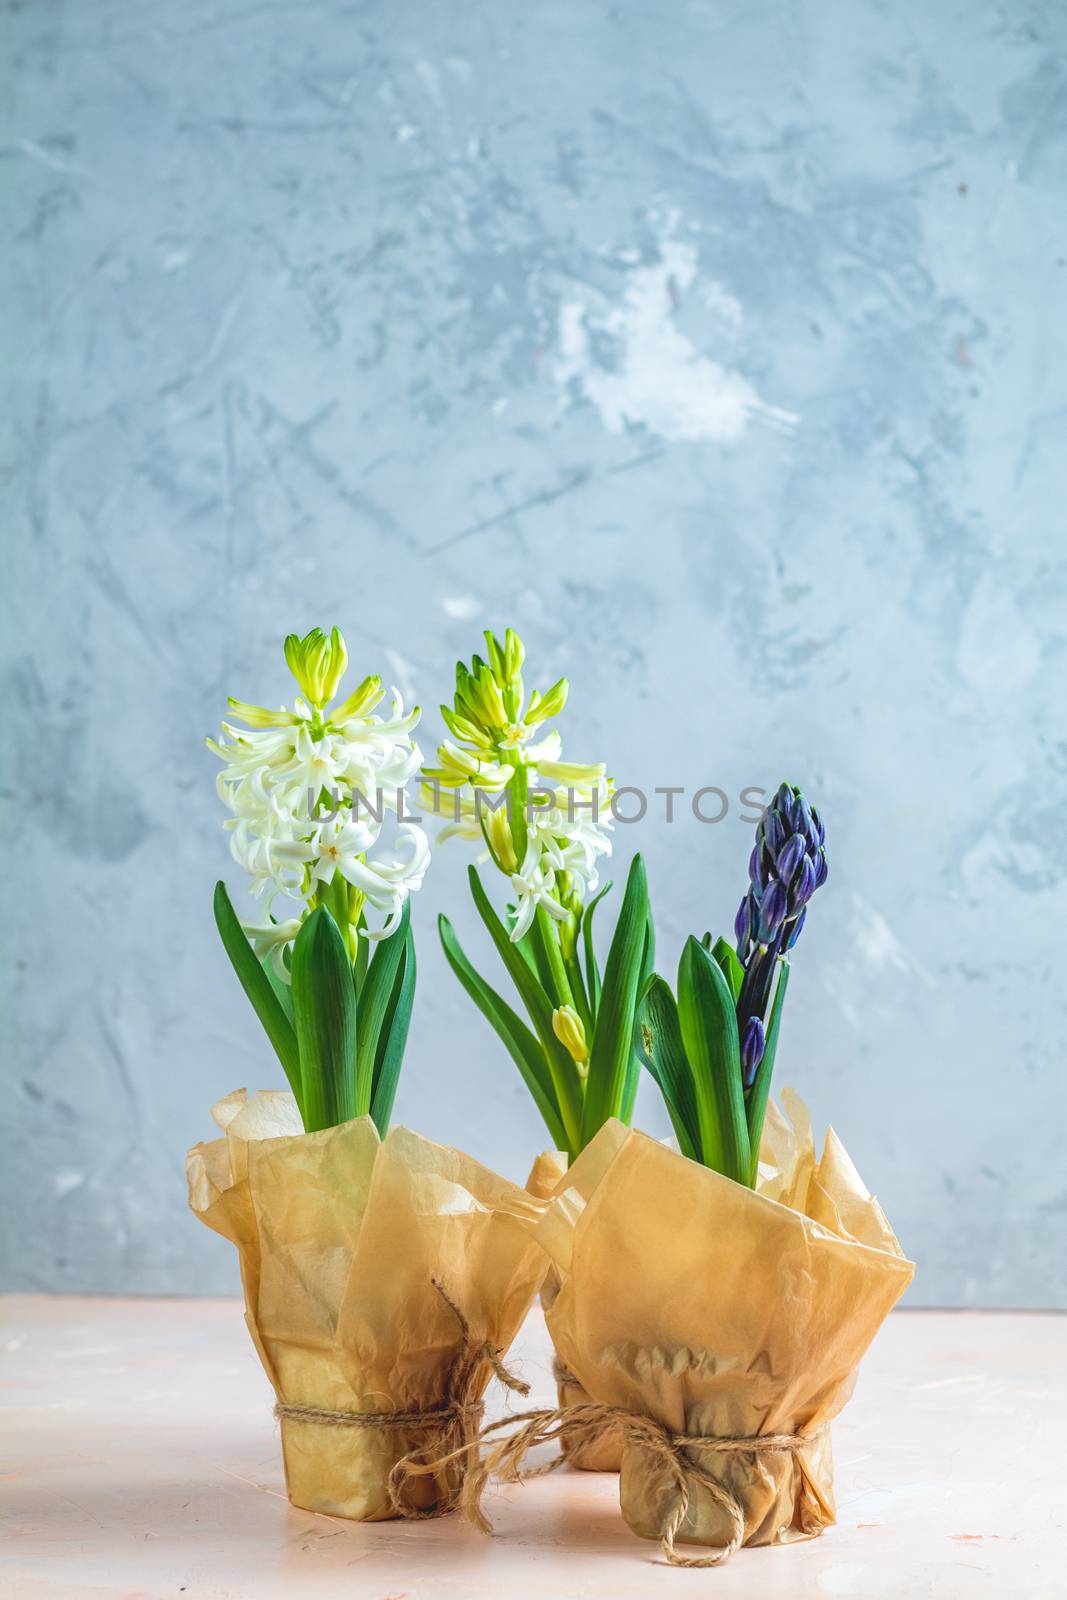 Two white hyacinths and blue hyacinth in pots on pink and blue concrete surface background. Minimalism, copy space for you text. Happy Easter, Mothers day, birthday, wedding marriage festive background.